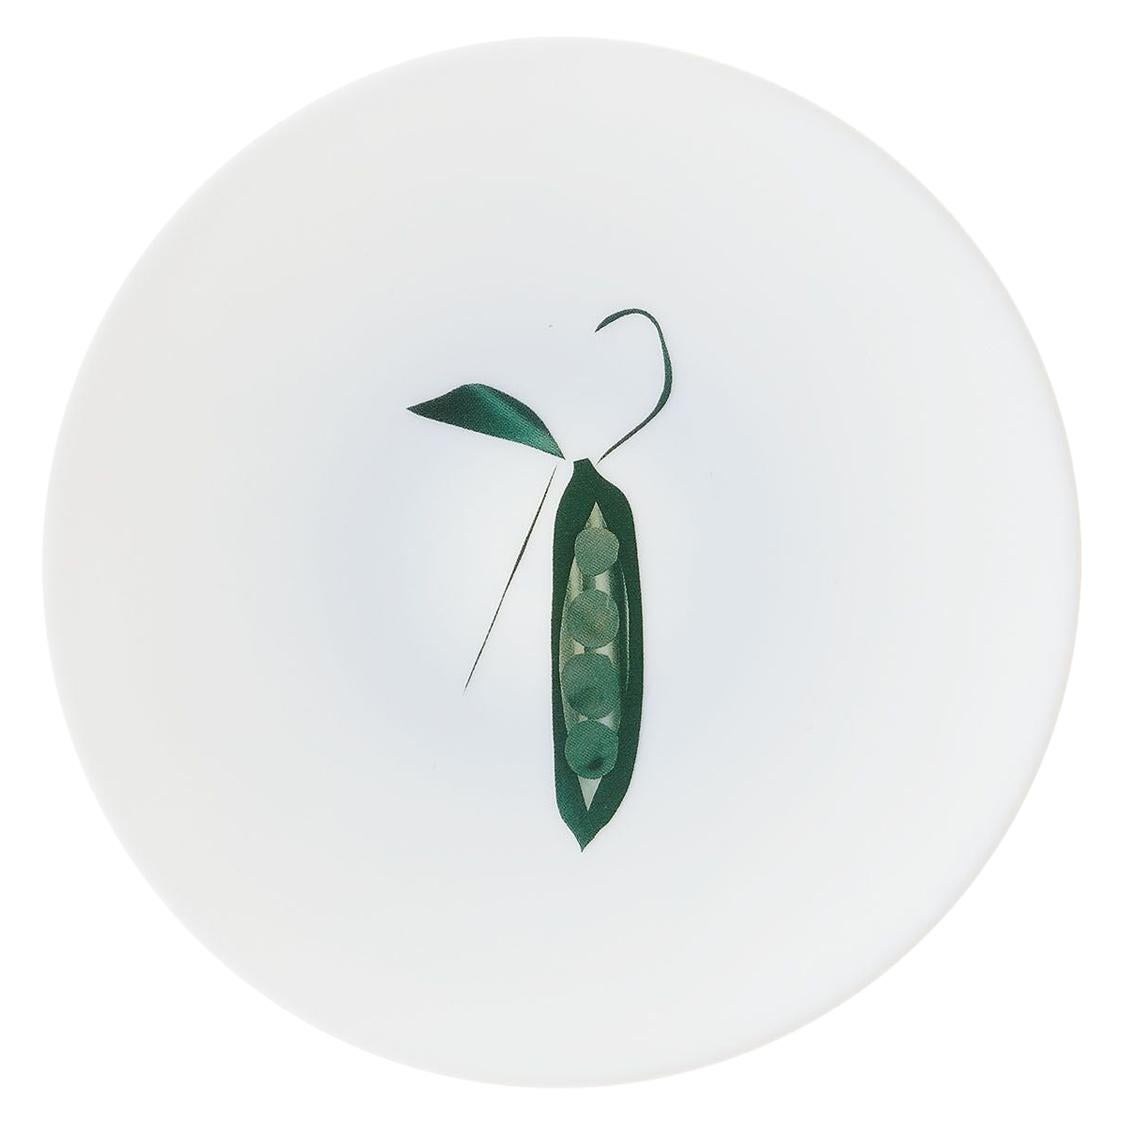 Bread Porcelain Plate By The Chef Alain Passard Model " Peas"